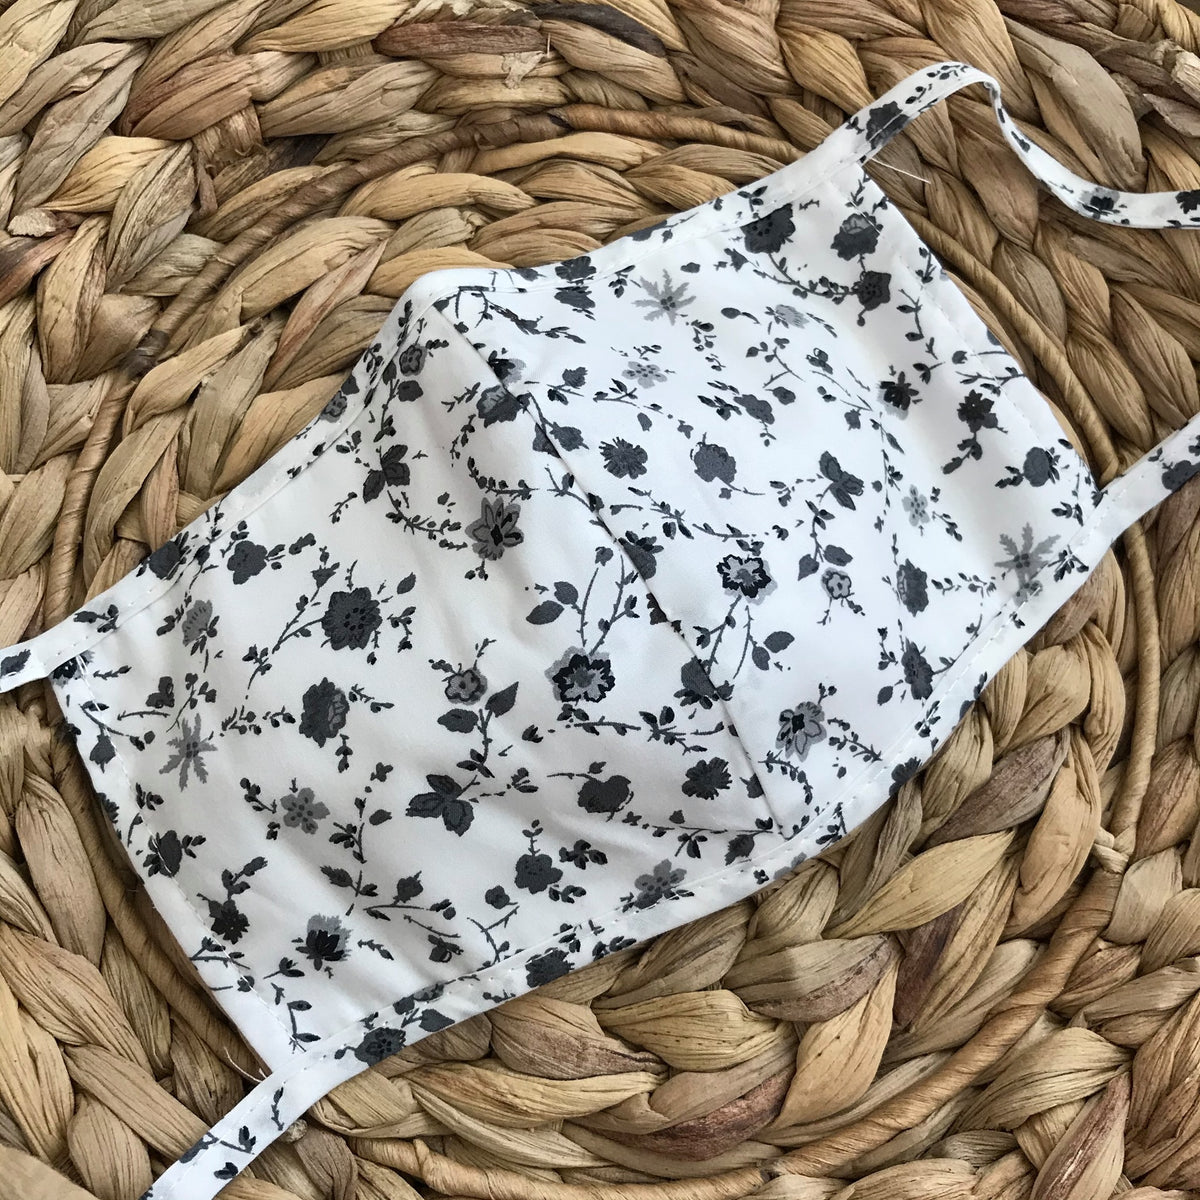 Slightly off white and gray floral printed face mask with tie straps to tie in the back of your head.